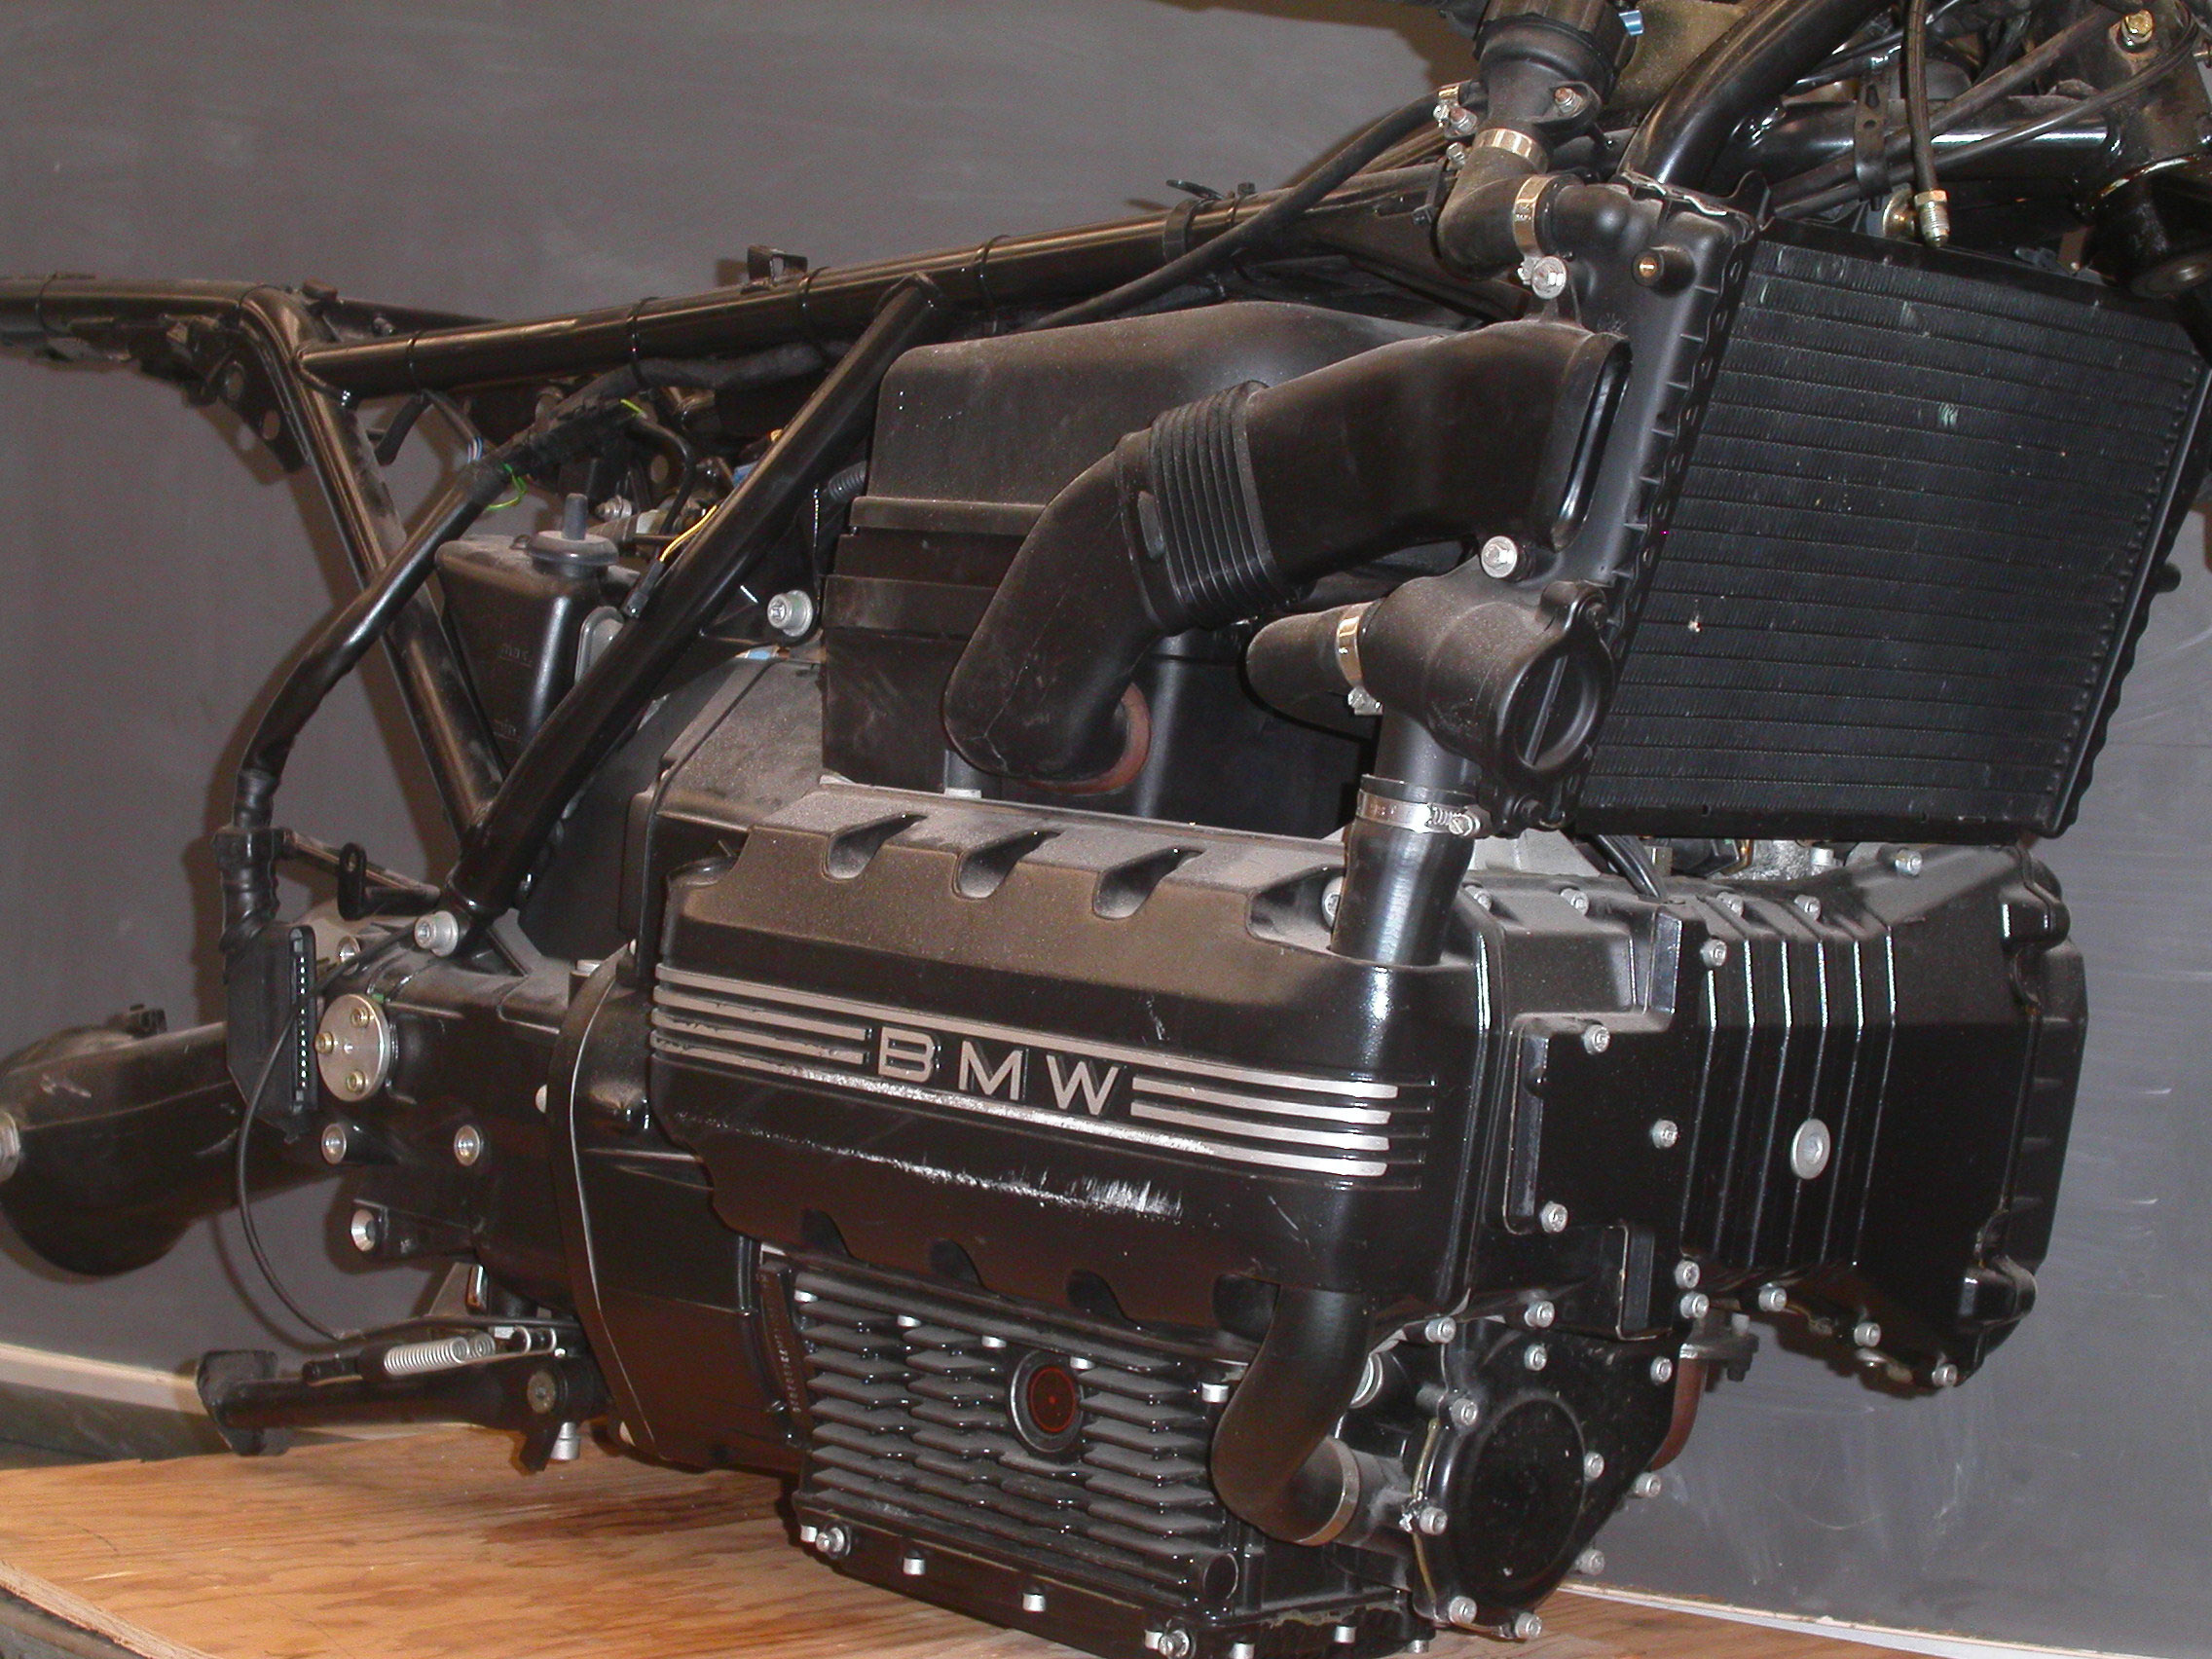 Multimedia Gallery - The salvaged 100 horespower BMW motorcycle engine